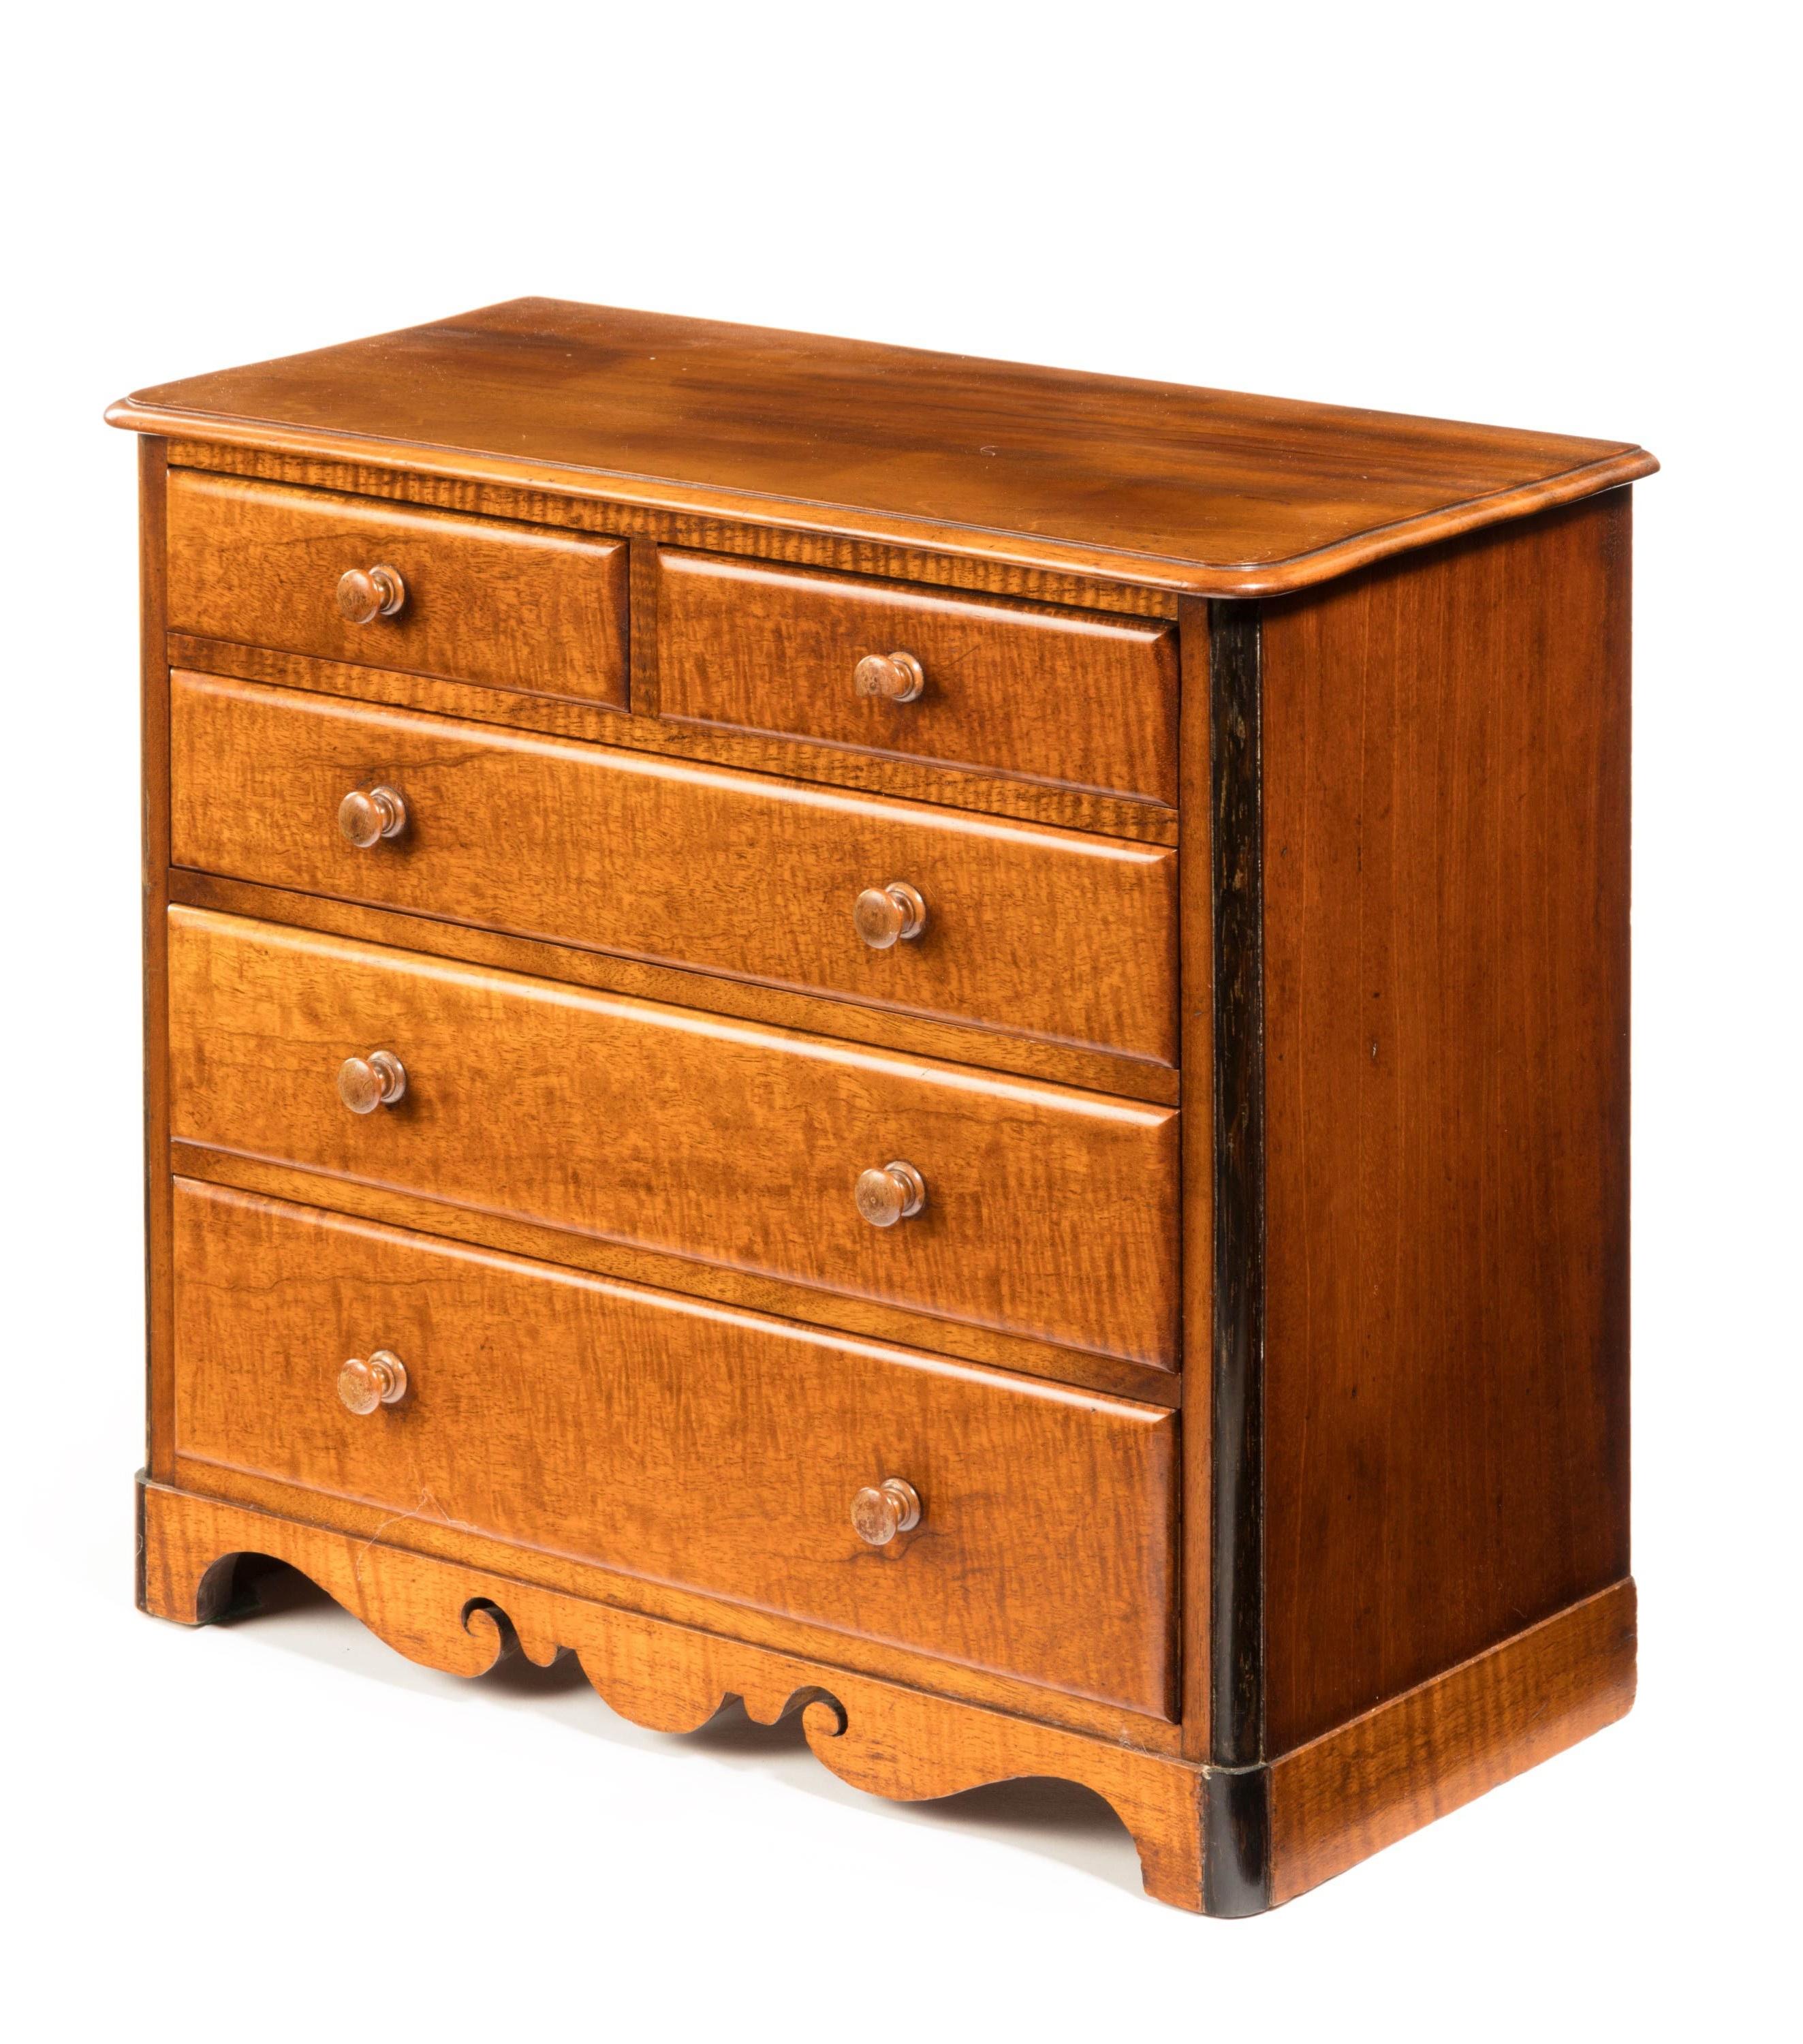 Victorian Period Satin Fiddleback Miniature Chest of Drawers In Good Condition For Sale In Peterborough, Northamptonshire